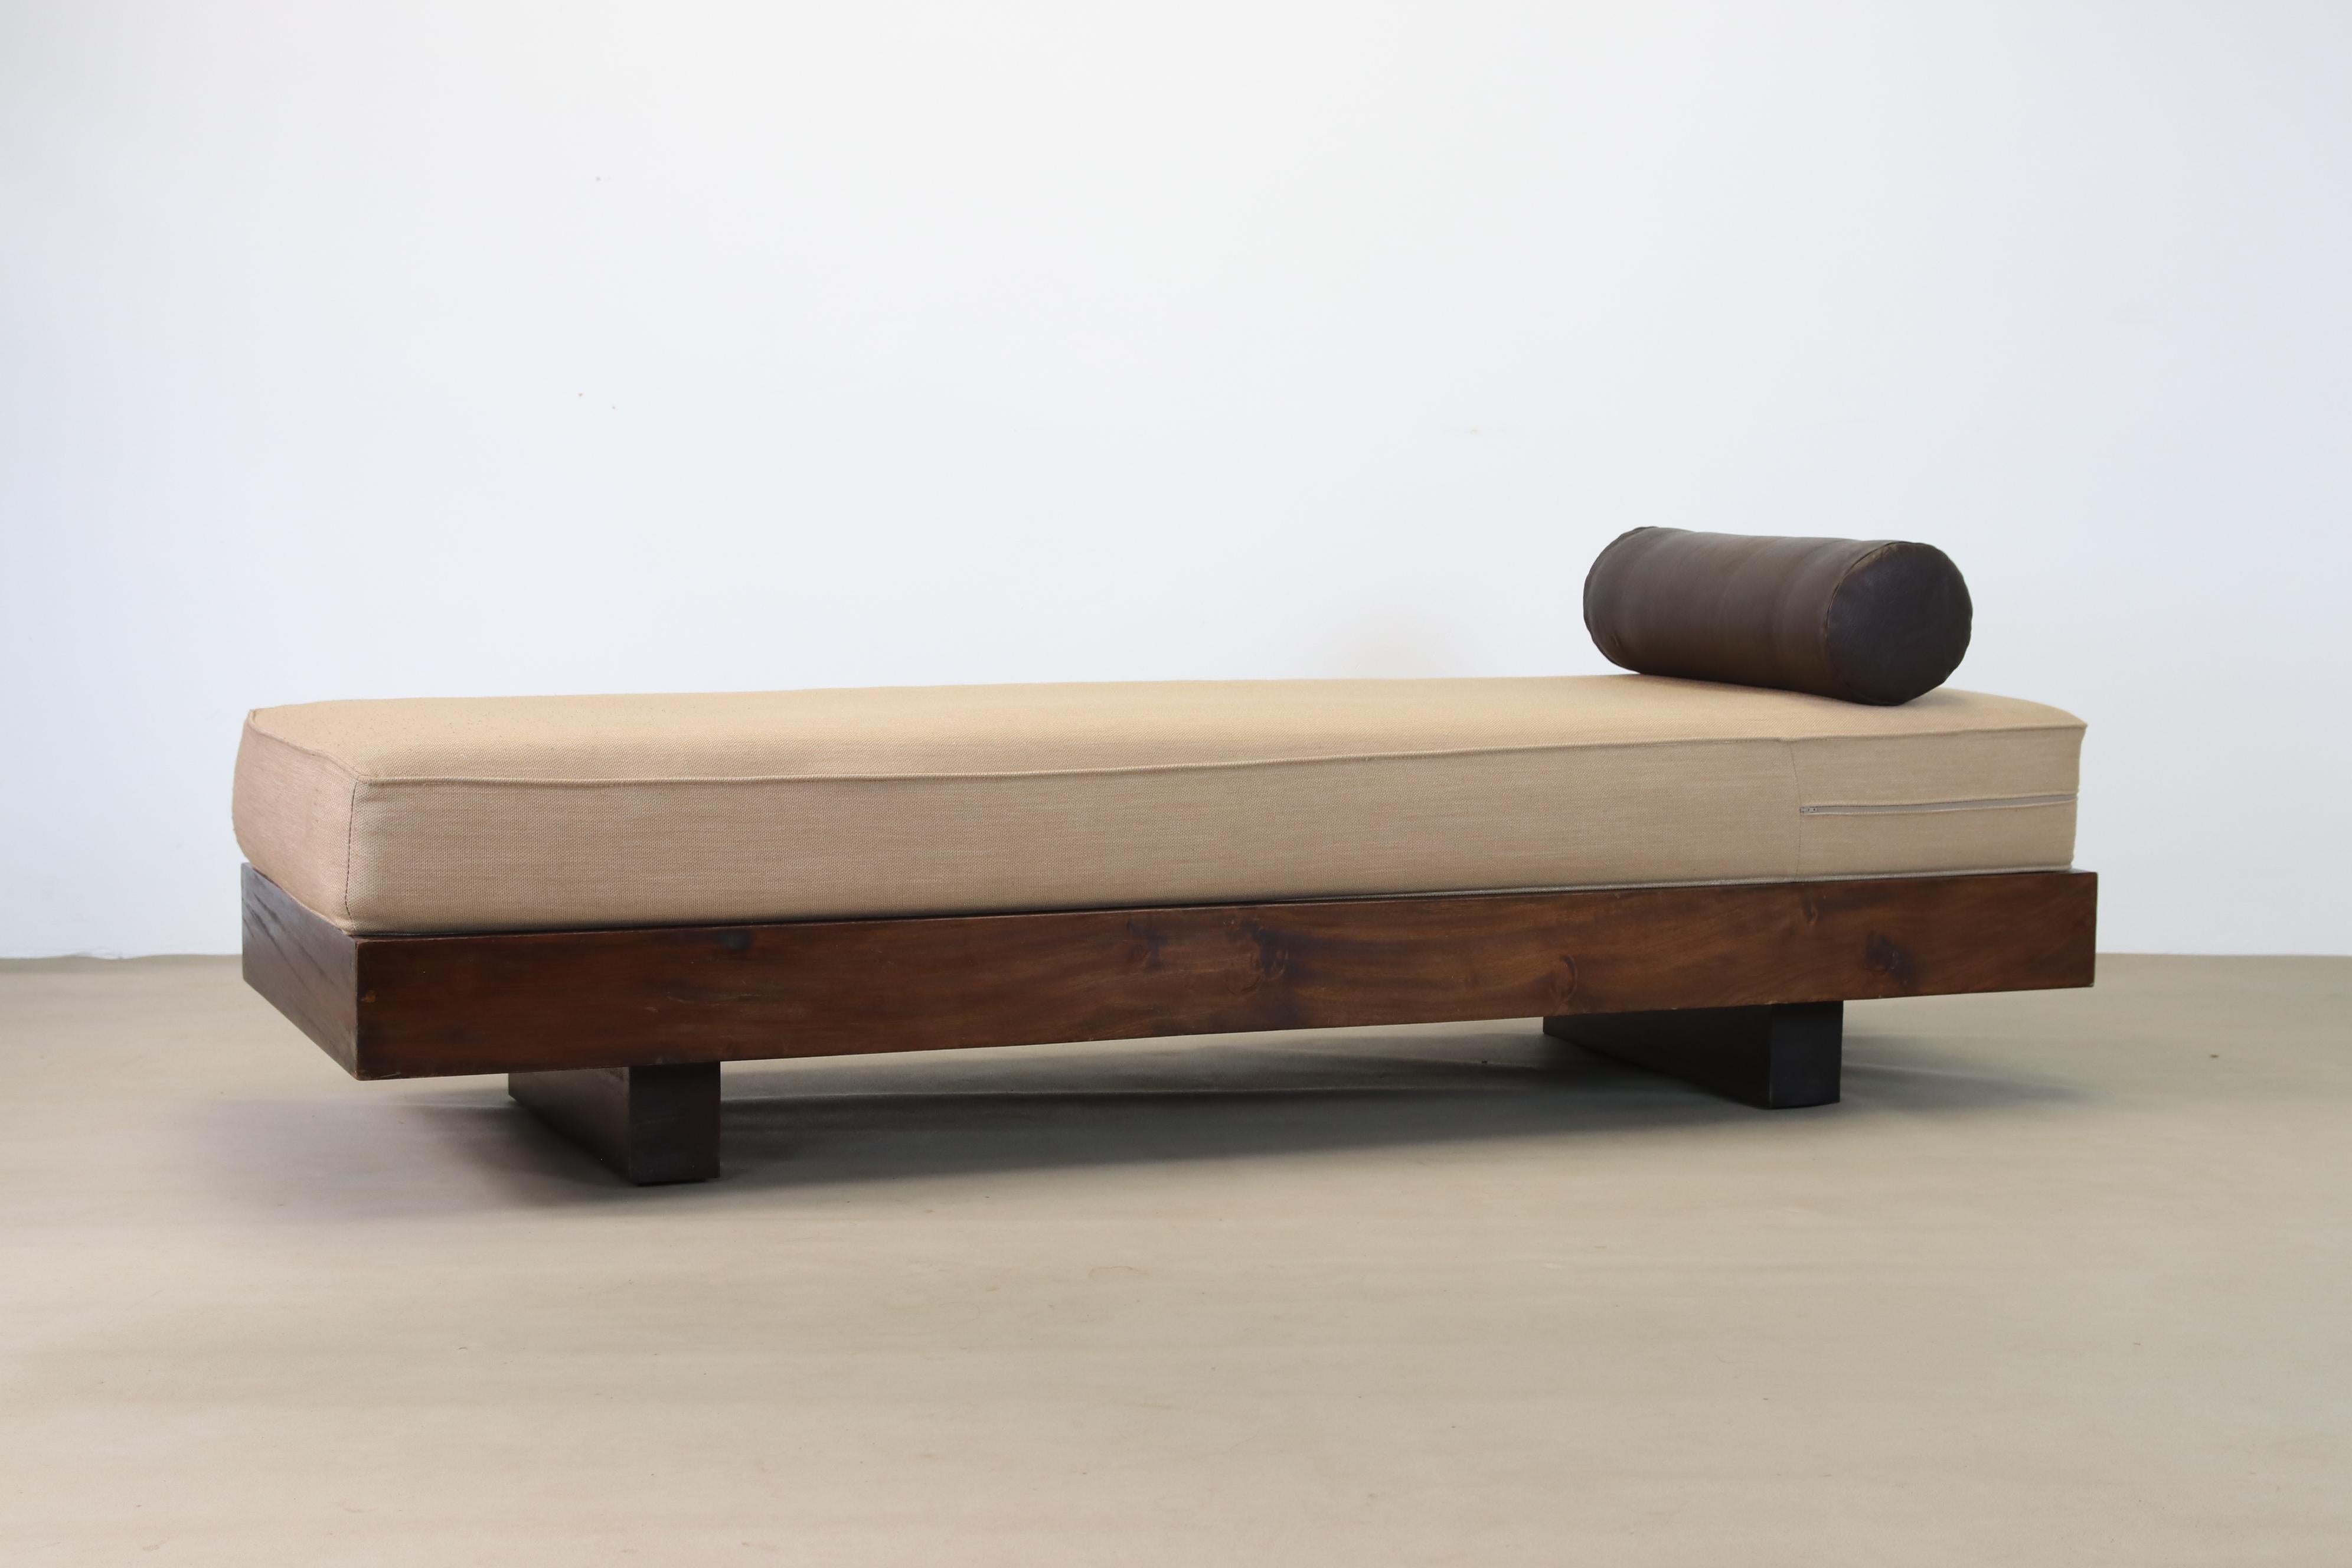 Mahogany daybed in the style of Jean Prouve, Charlotte Perriand and Le Corbusier.
Made from solid mahogany wood. The modernist designed daybed has an upholstered mattress with inner springs and a round brown leather cushion. Beautifully simplistic